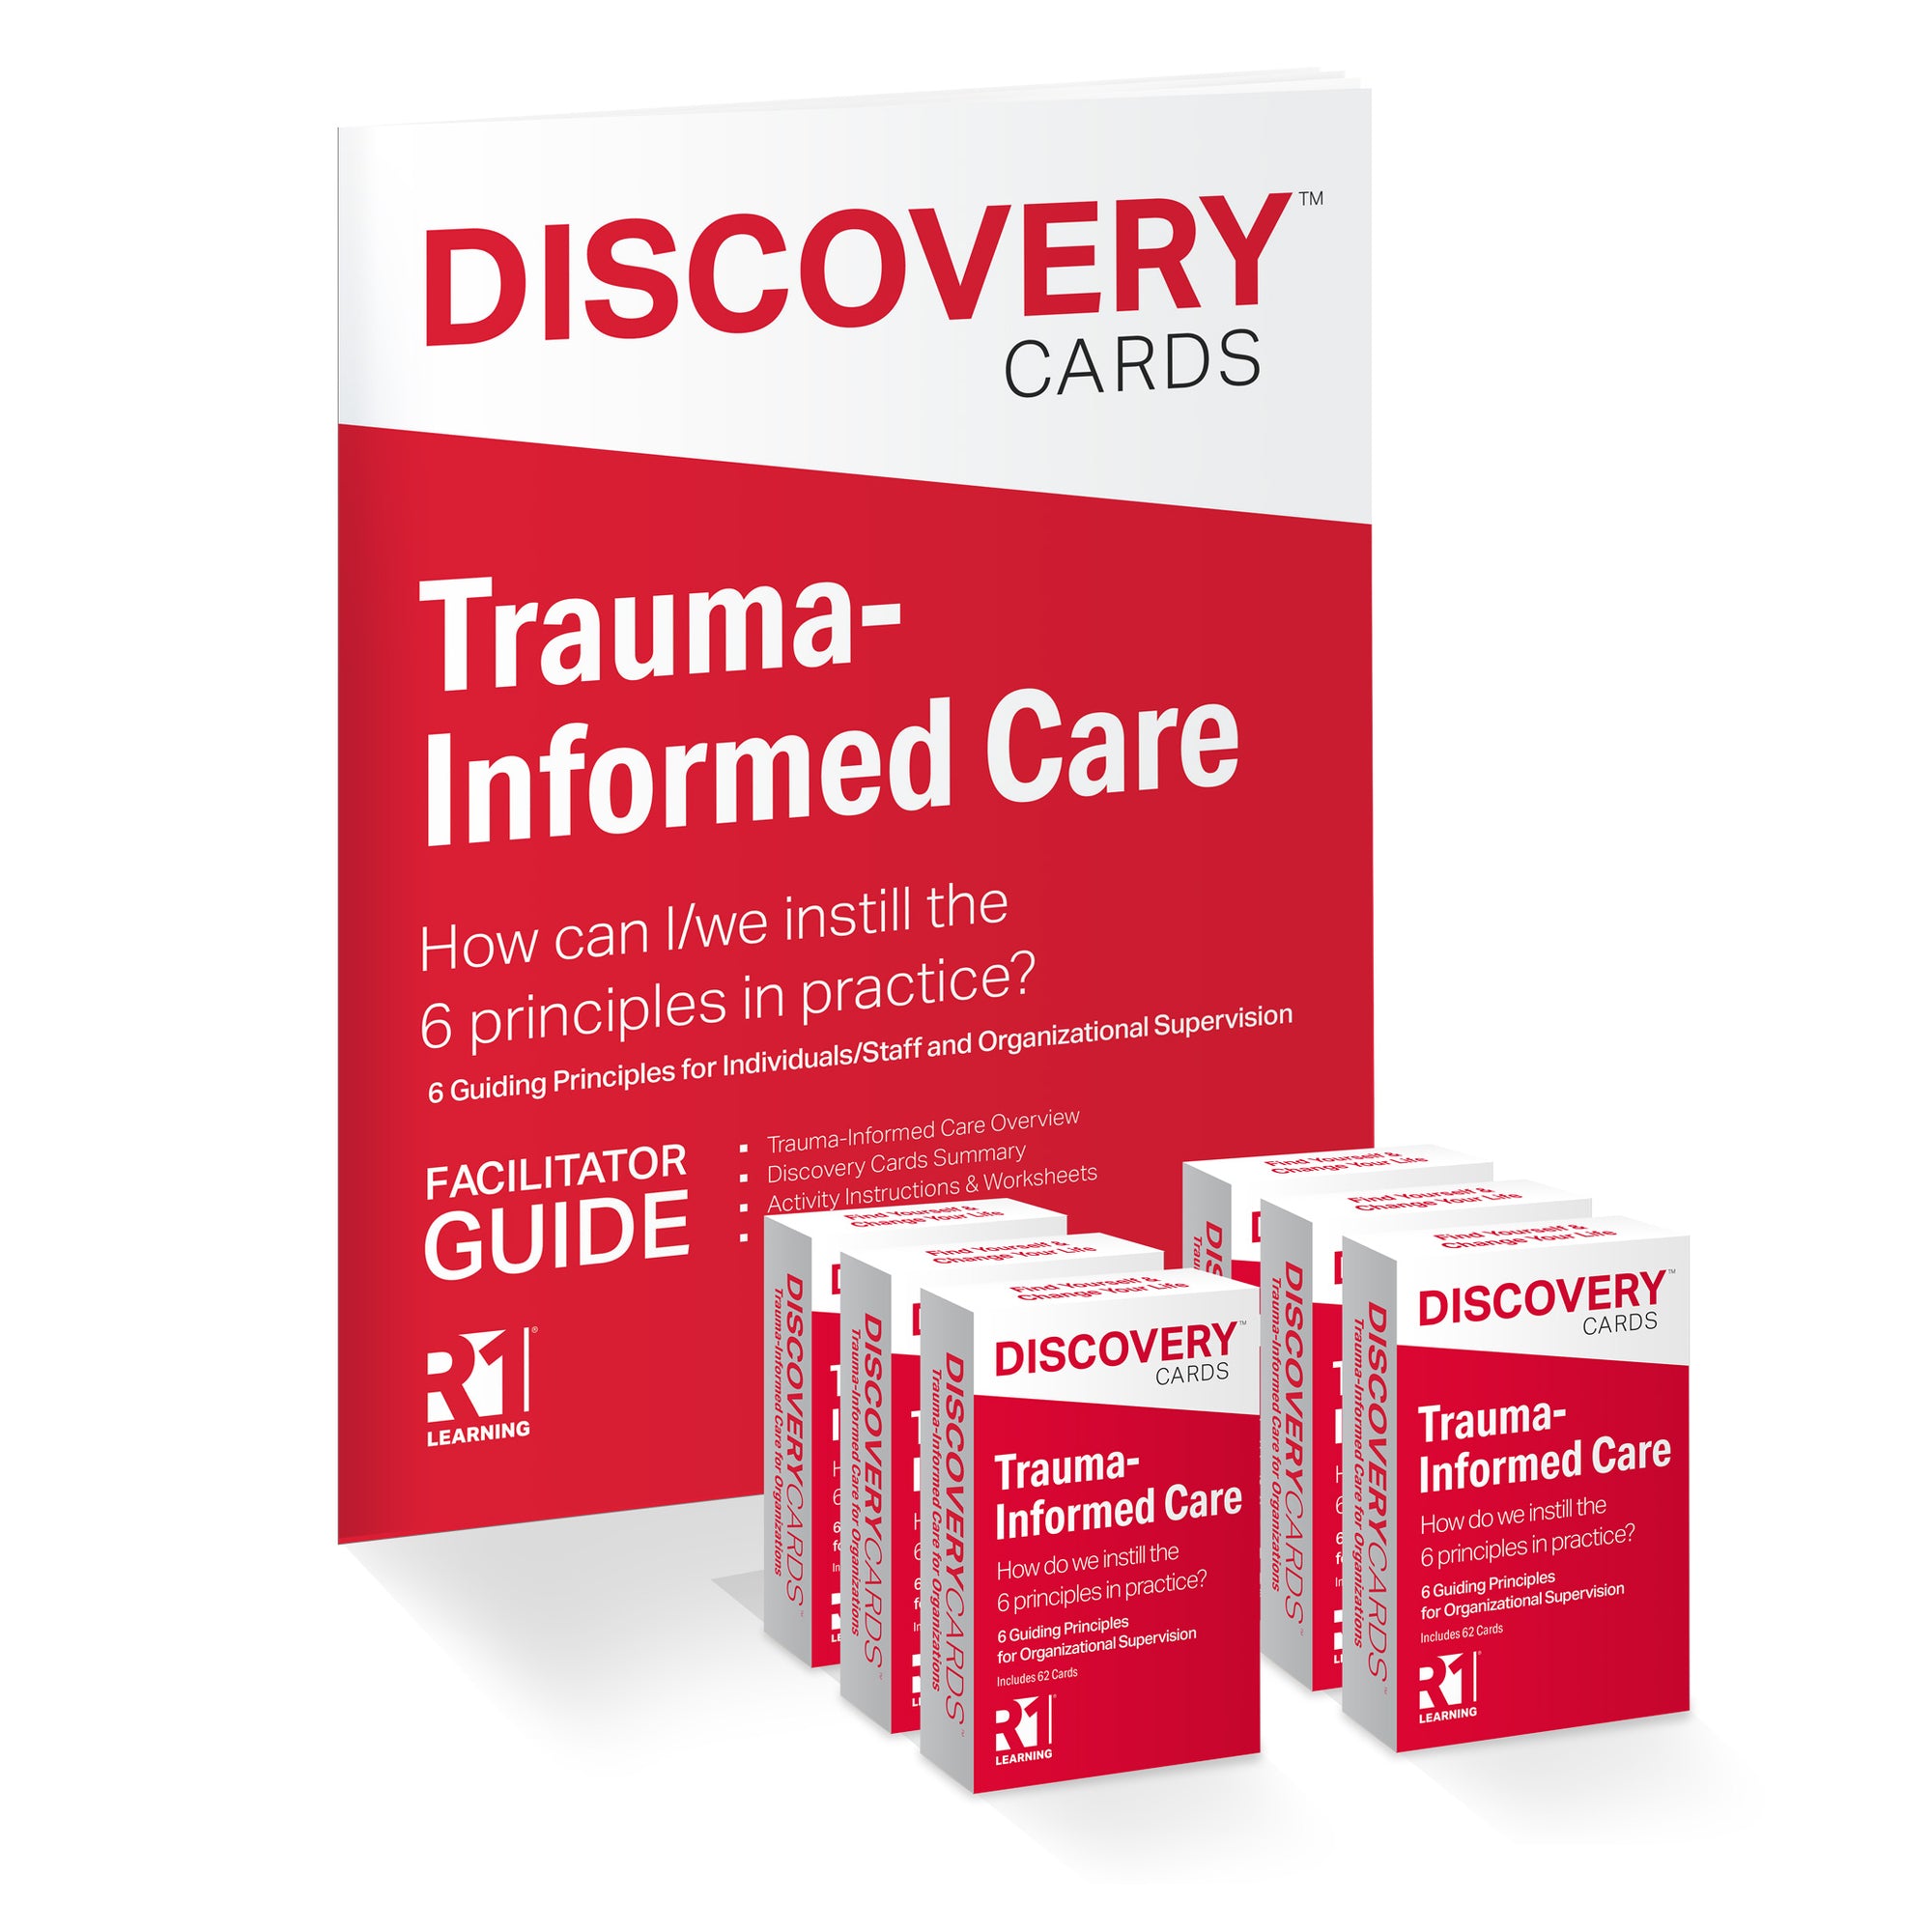 Trauma-Informed Care (WE) Group Kit — 6 decks, for Organizational Supervision